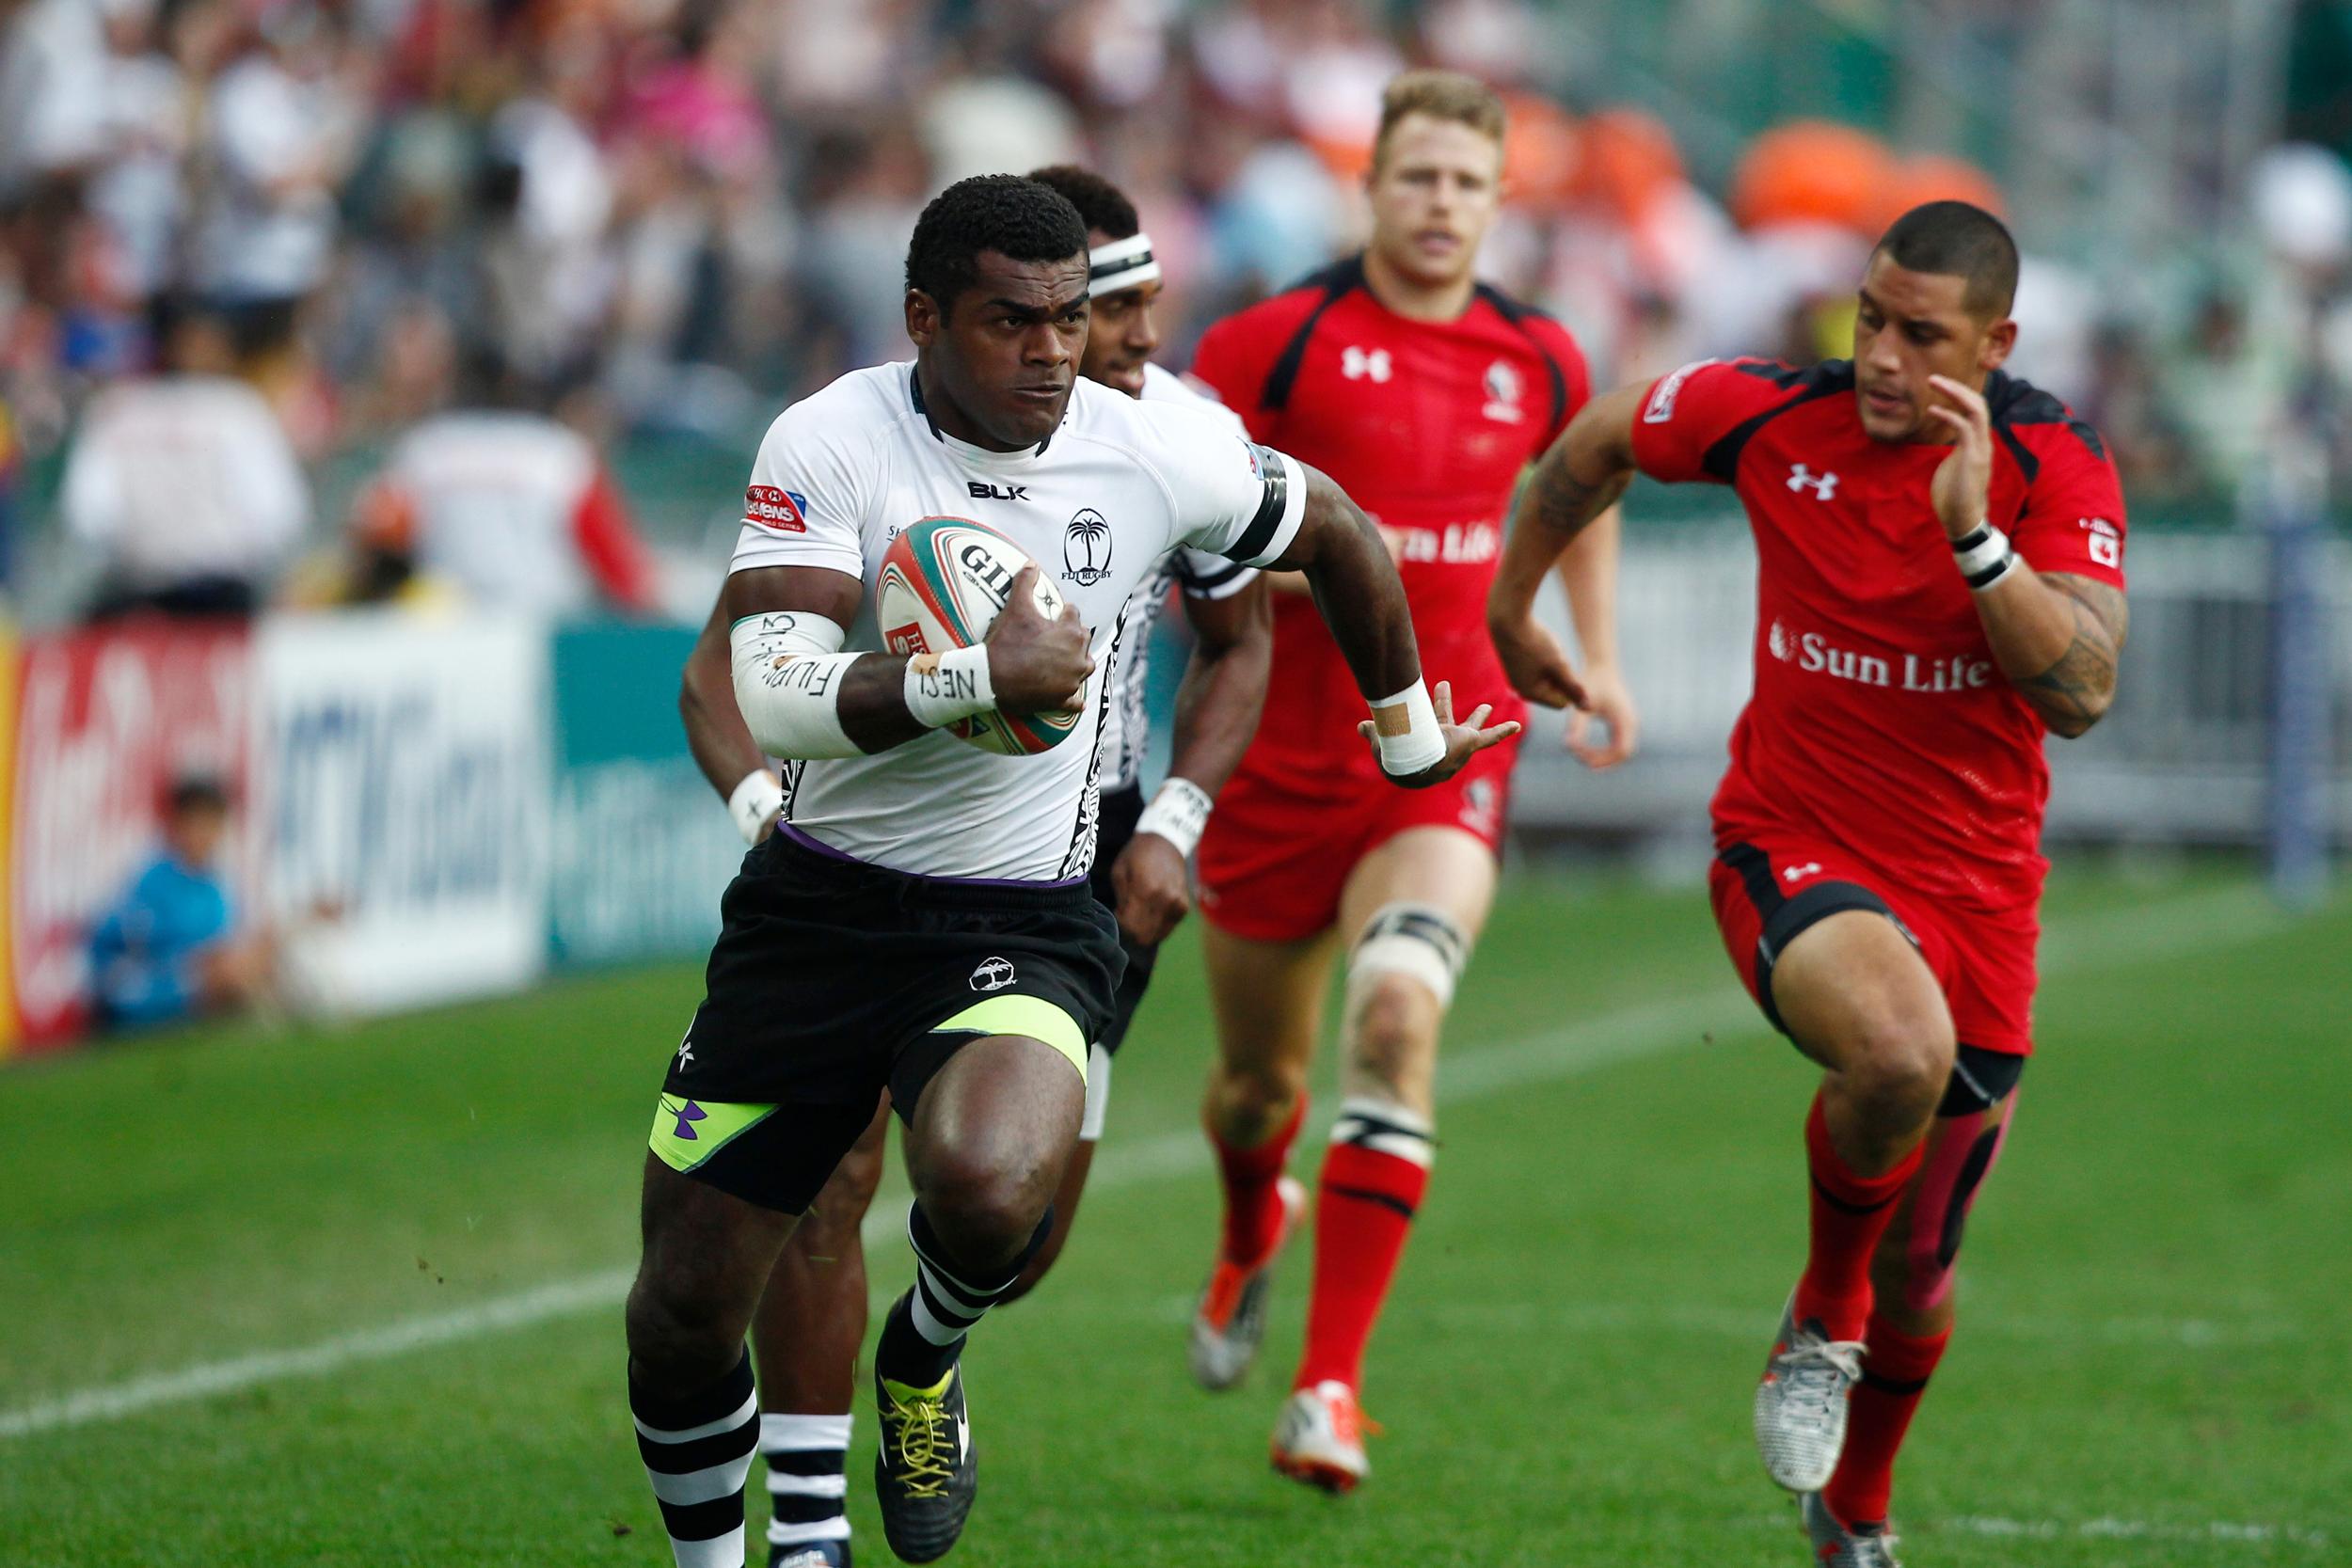 Fiji sealed their place in the quarter-finals after they earned comfortable wins over Belgium and Canada on day two in Hong Kong ©World Rugby